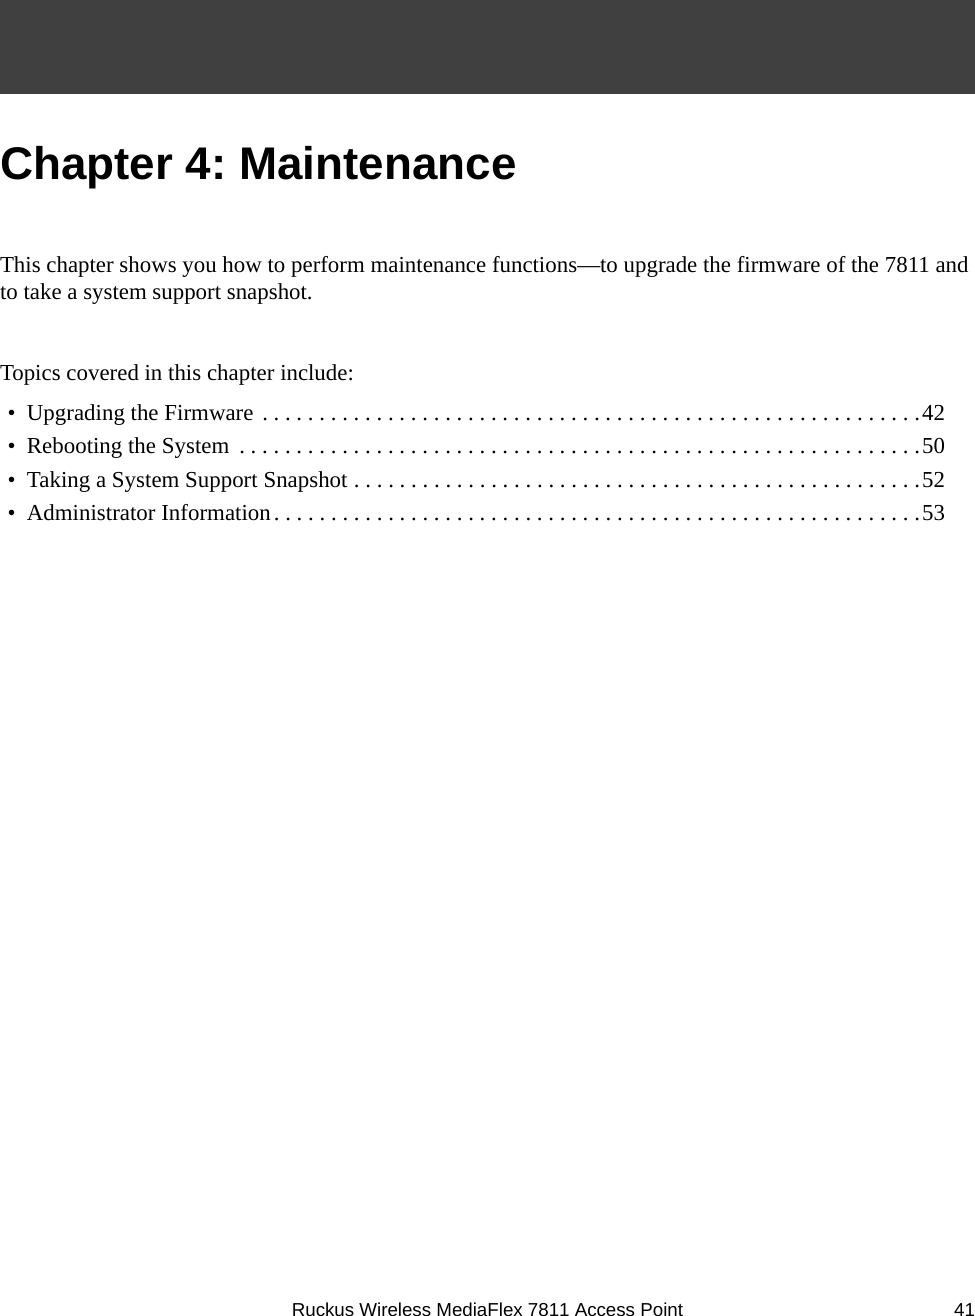 Ruckus Wireless MediaFlex 7811 Access Point 41Chapter 4: MaintenanceThis chapter shows you how to perform maintenance functions—to upgrade the firmware of the 7811 and to take a system support snapshot.Topics covered in this chapter include:•  Upgrading the Firmware . . . . . . . . . . . . . . . . . . . . . . . . . . . . . . . . . . . . . . . . . . . . . . . . . . . . . . . . . .42•  Rebooting the System  . . . . . . . . . . . . . . . . . . . . . . . . . . . . . . . . . . . . . . . . . . . . . . . . . . . . . . . . . . . .50•  Taking a System Support Snapshot . . . . . . . . . . . . . . . . . . . . . . . . . . . . . . . . . . . . . . . . . . . . . . . . . .52•  Administrator Information. . . . . . . . . . . . . . . . . . . . . . . . . . . . . . . . . . . . . . . . . . . . . . . . . . . . . . . . .53